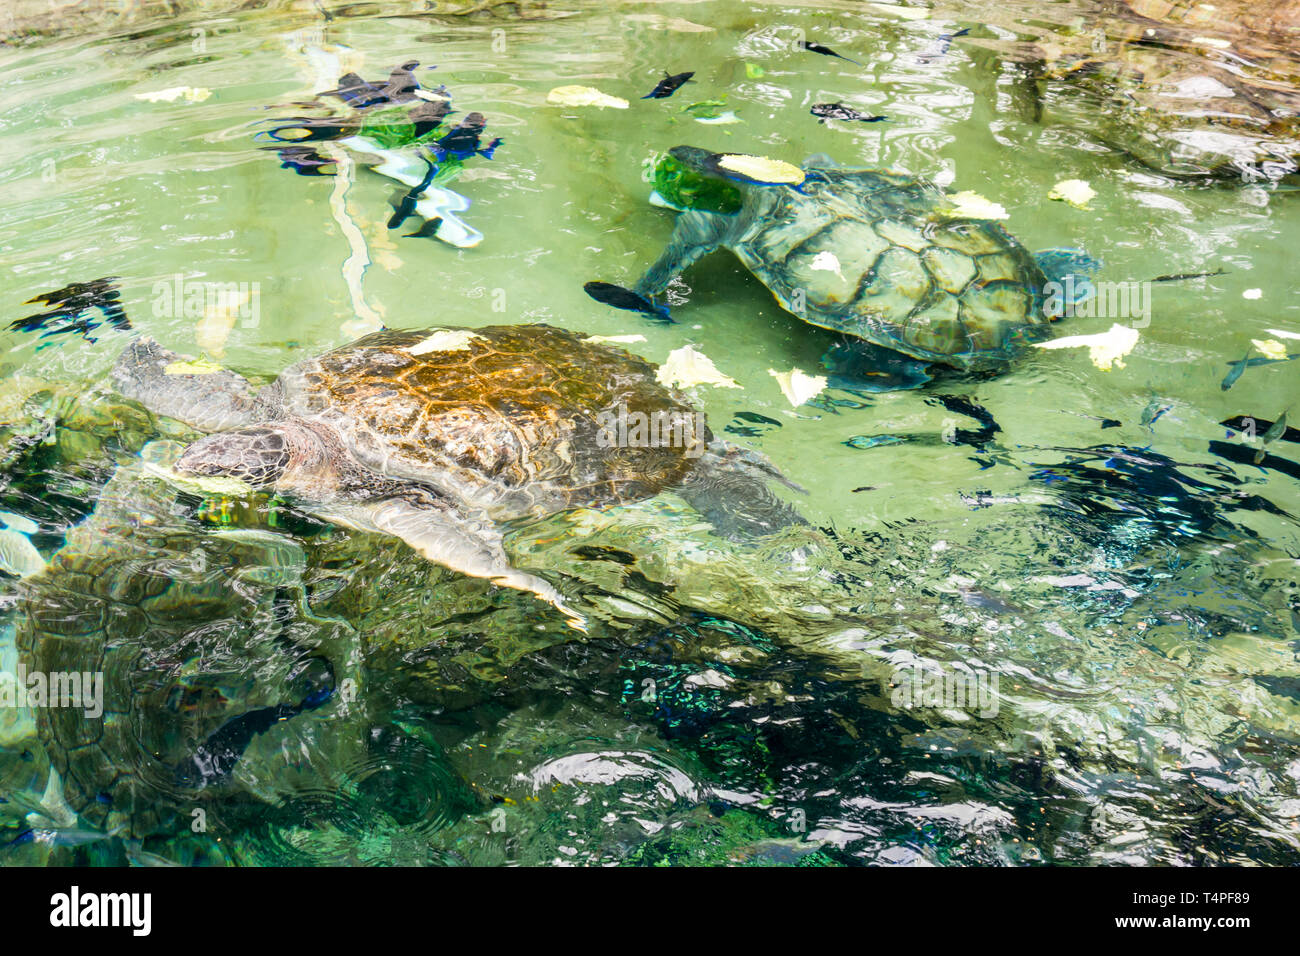 Giant turtles with hard leather shells swim in captivity at Seaworld in Orlando. Stock Photo